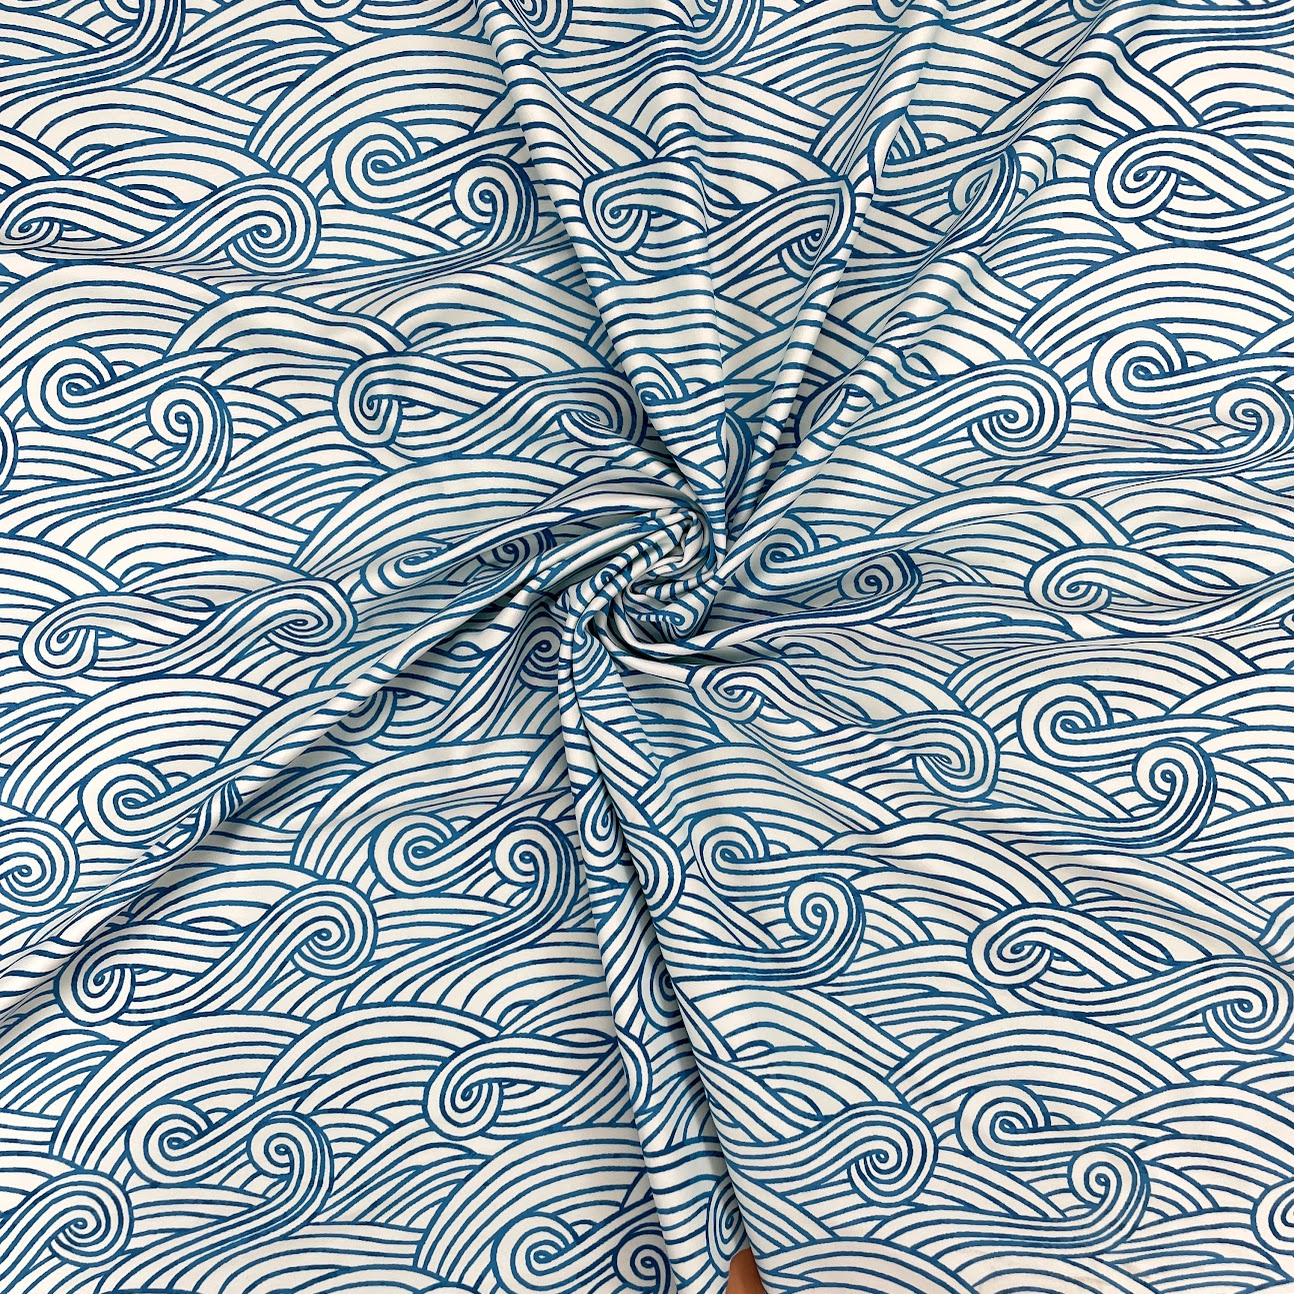 Swim Knit - UPF 50 - Blue Waves - Deadstock - 250gsm - Recycled Polyester